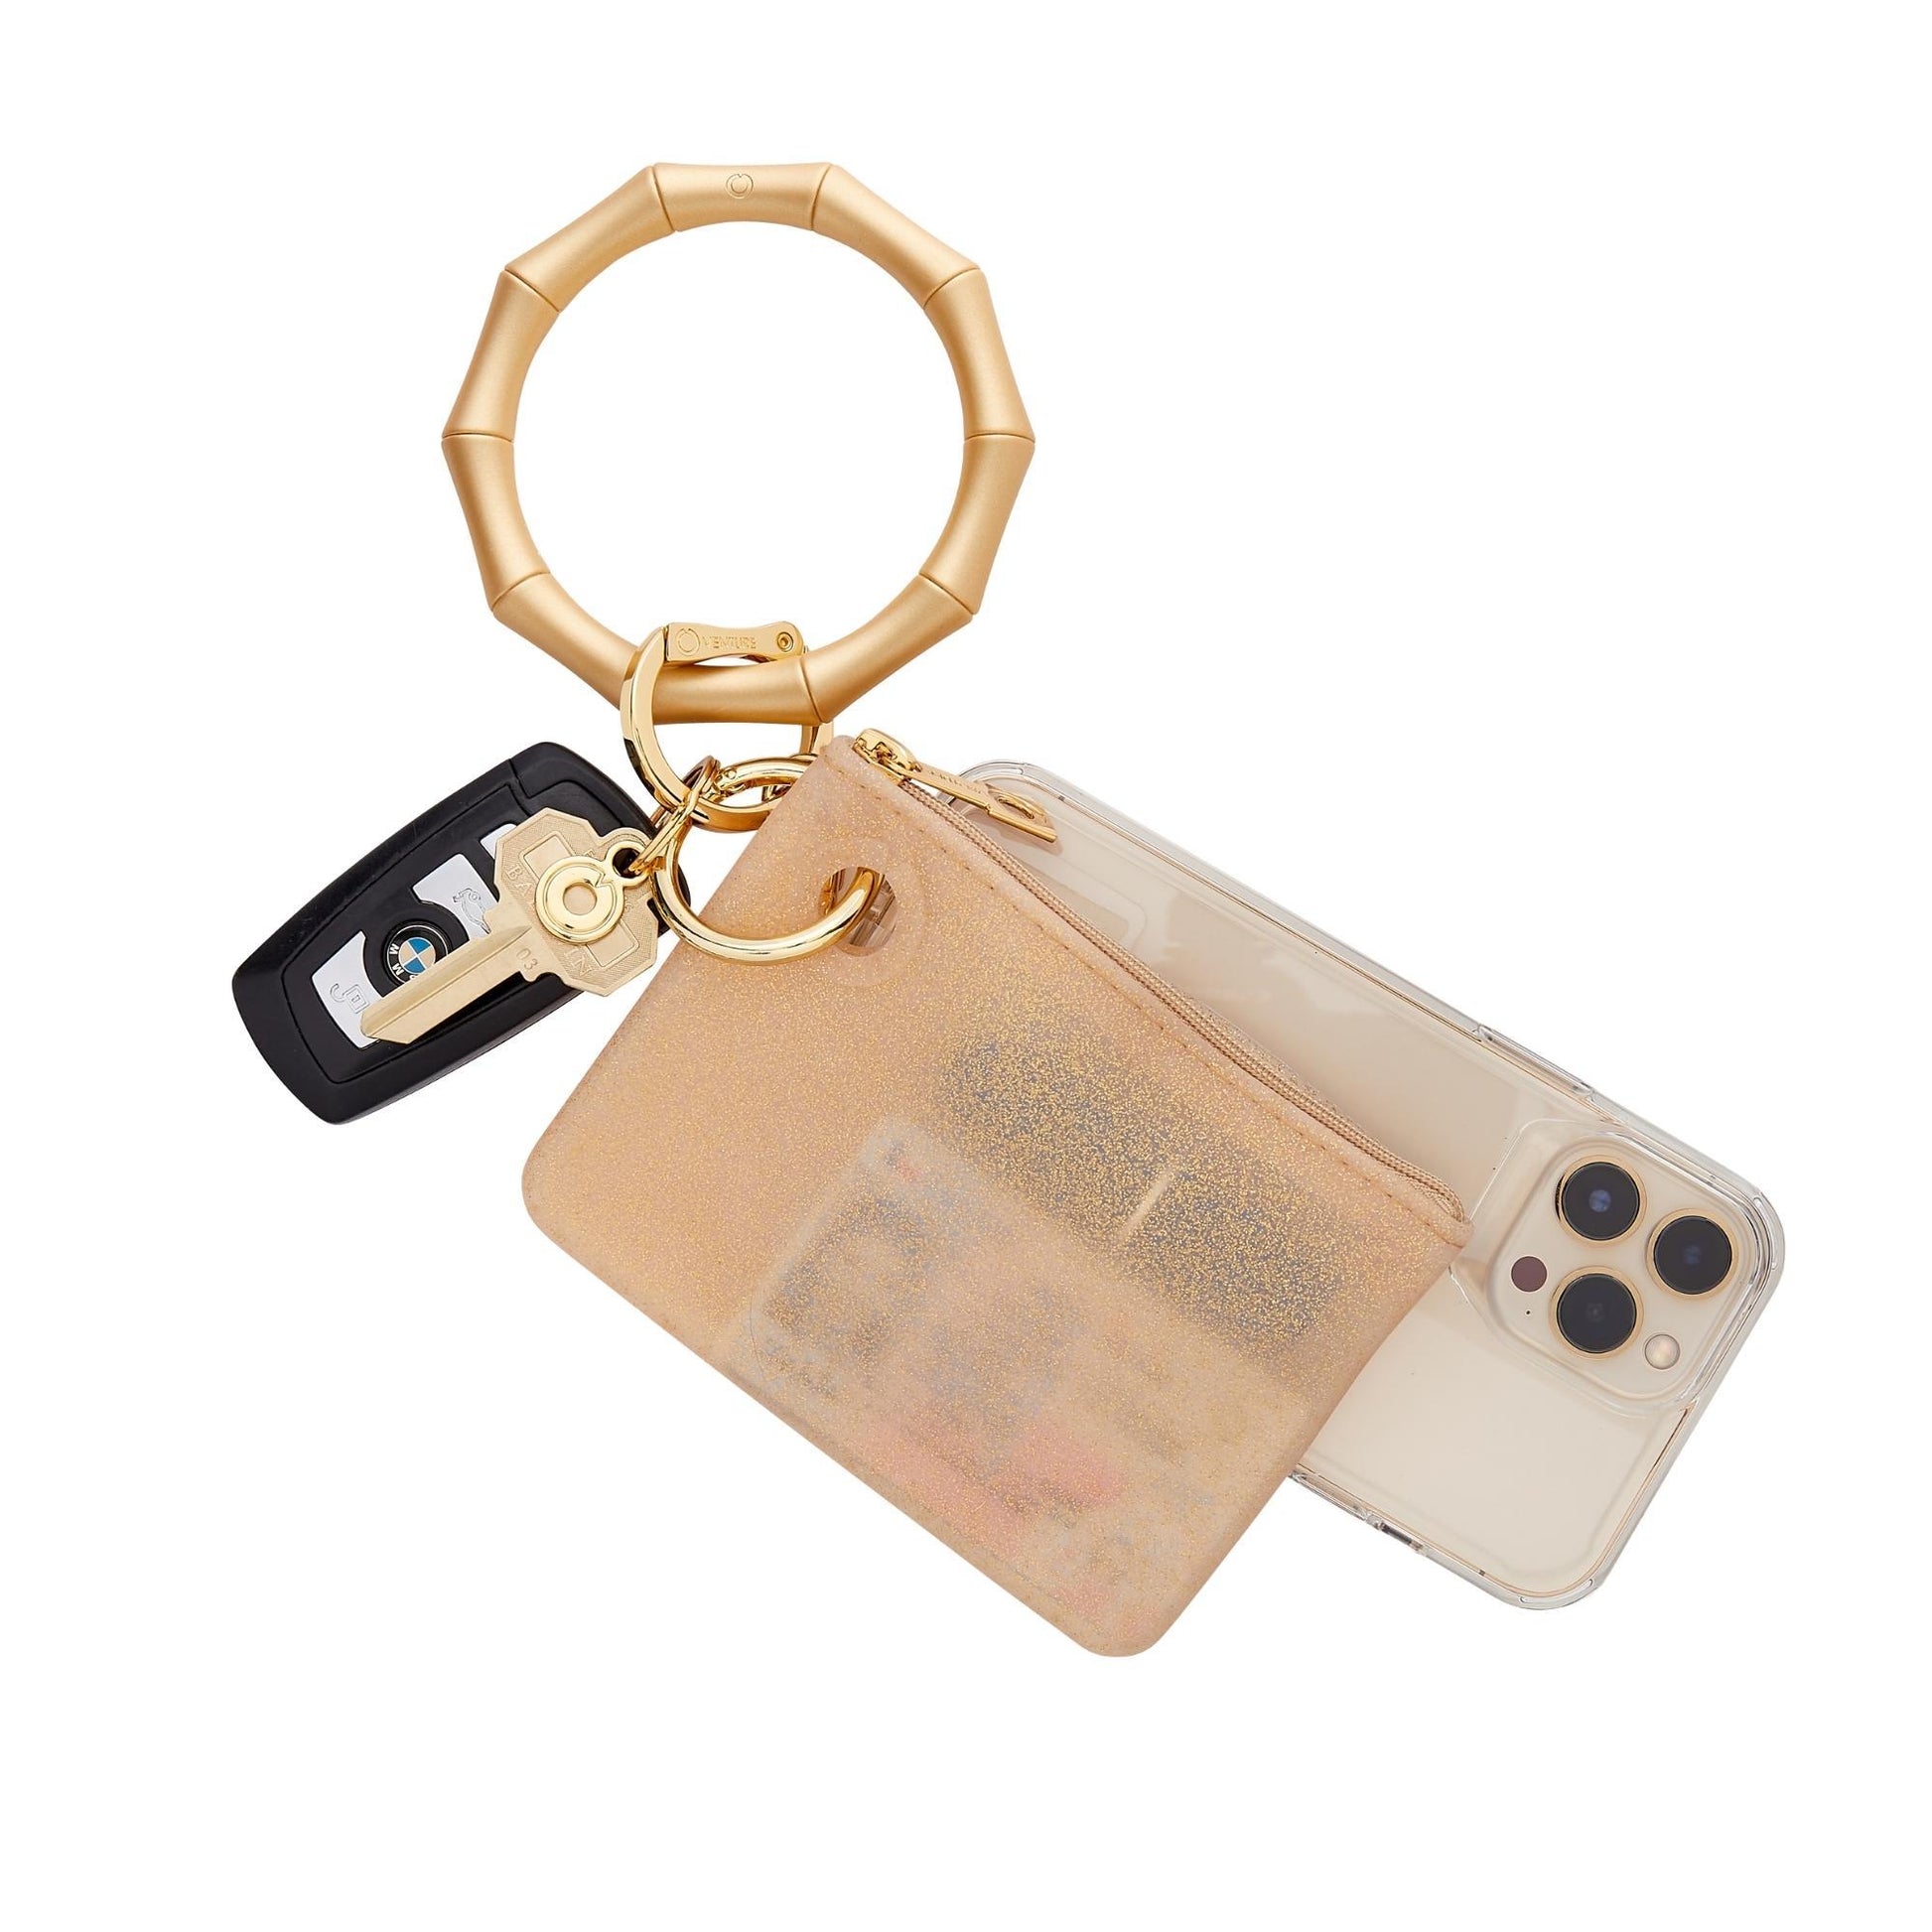 A Mini Pouch Wristlet with Phone Holder in gold confetti.